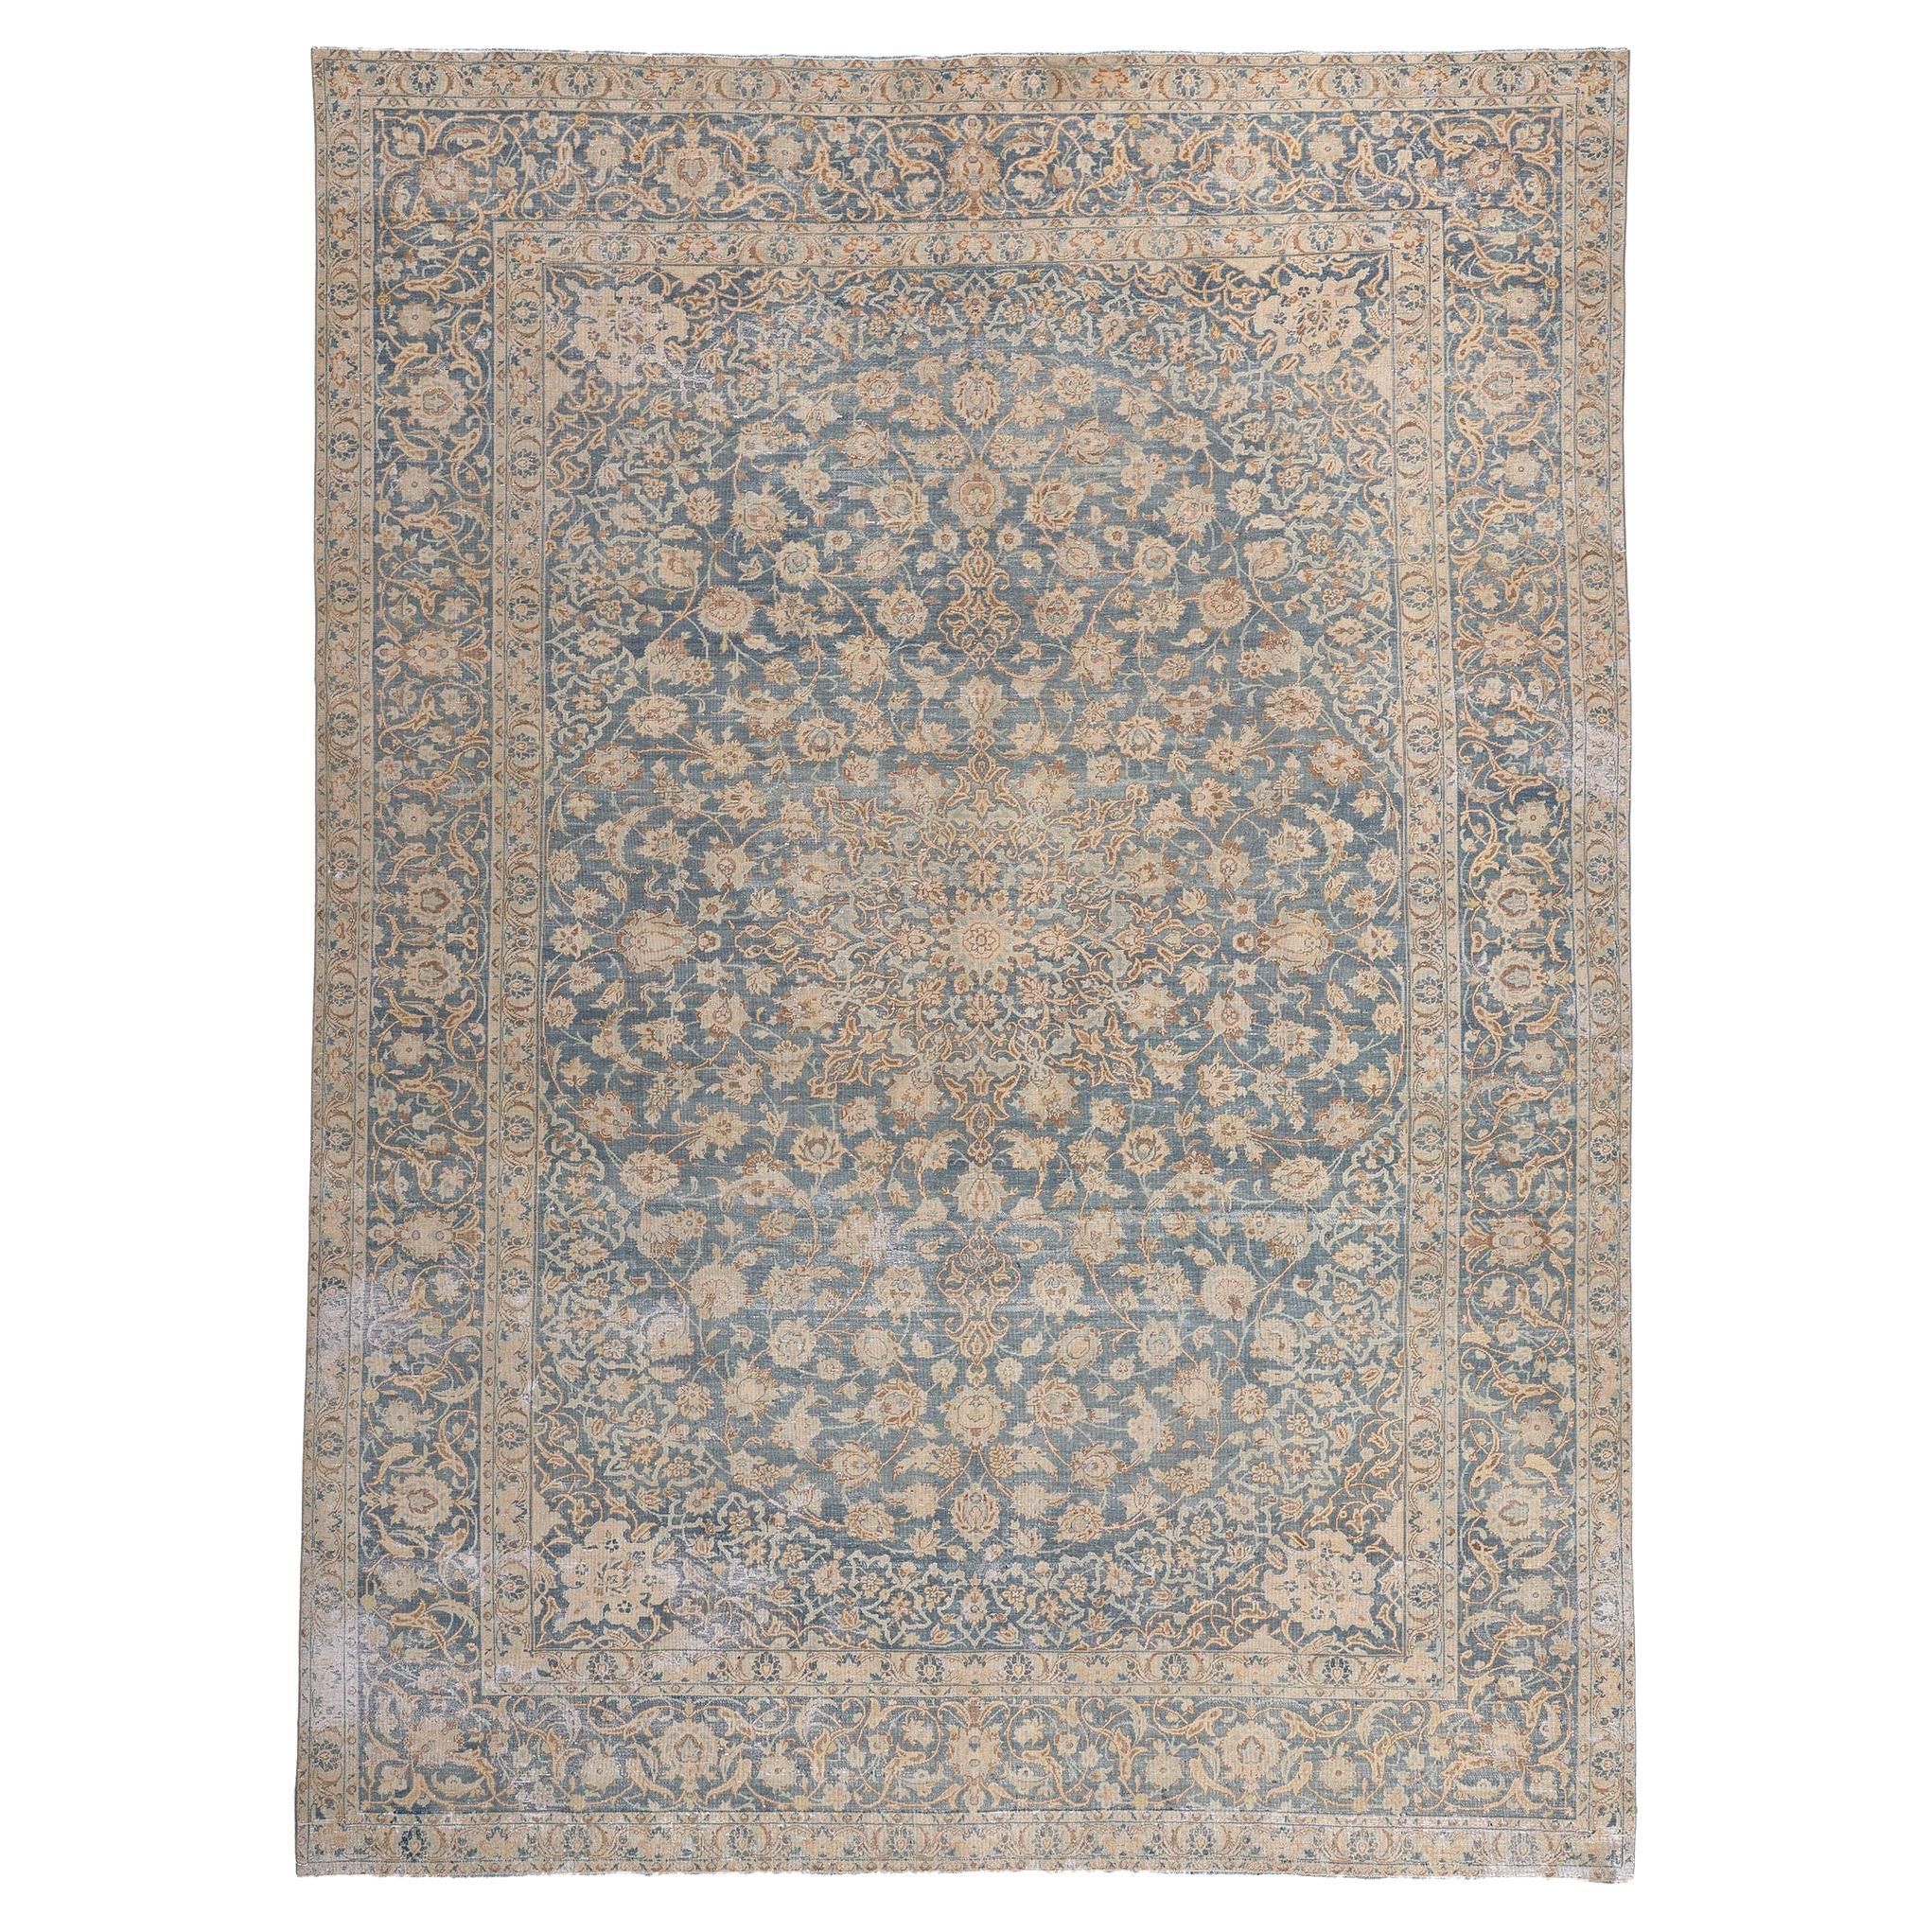 Distressed Antique Persian Tabriz Rug, Faded Soft Earth-Tone Colors